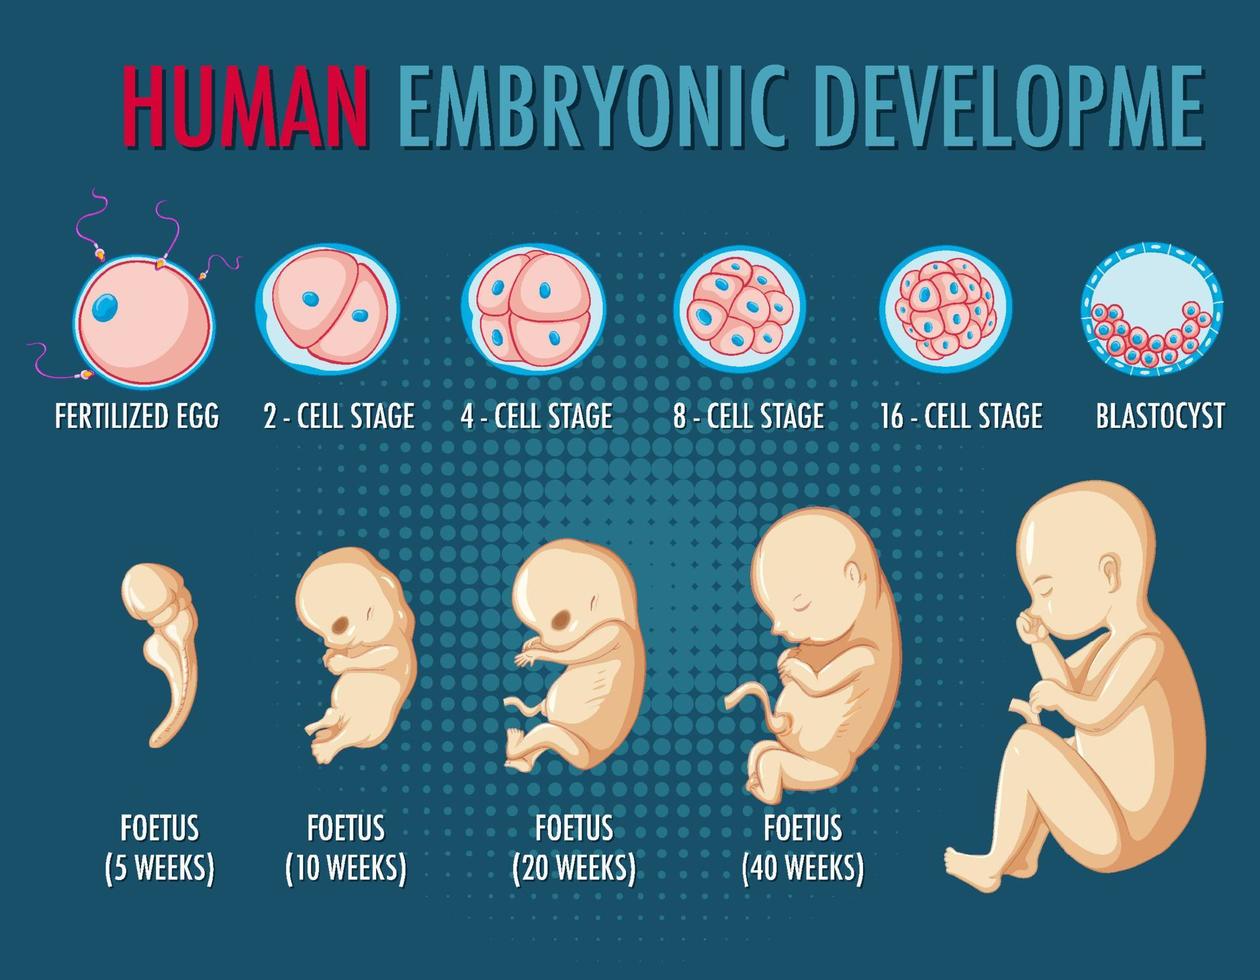 Human embryonic development infographic vector